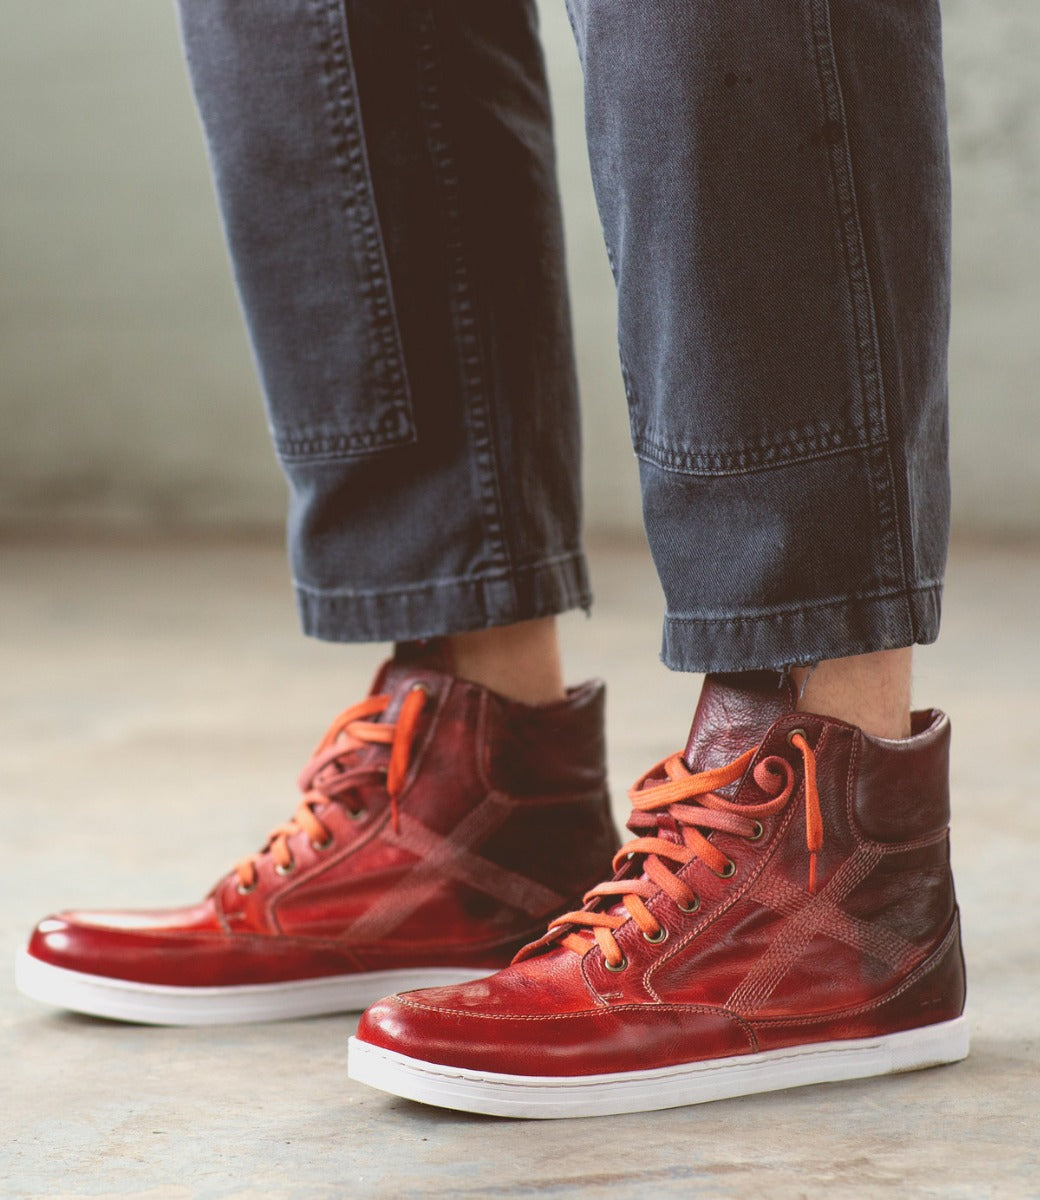 A person wearing Lordmind high top sneakers with orange laces. (Brand Name: Bed Stu)